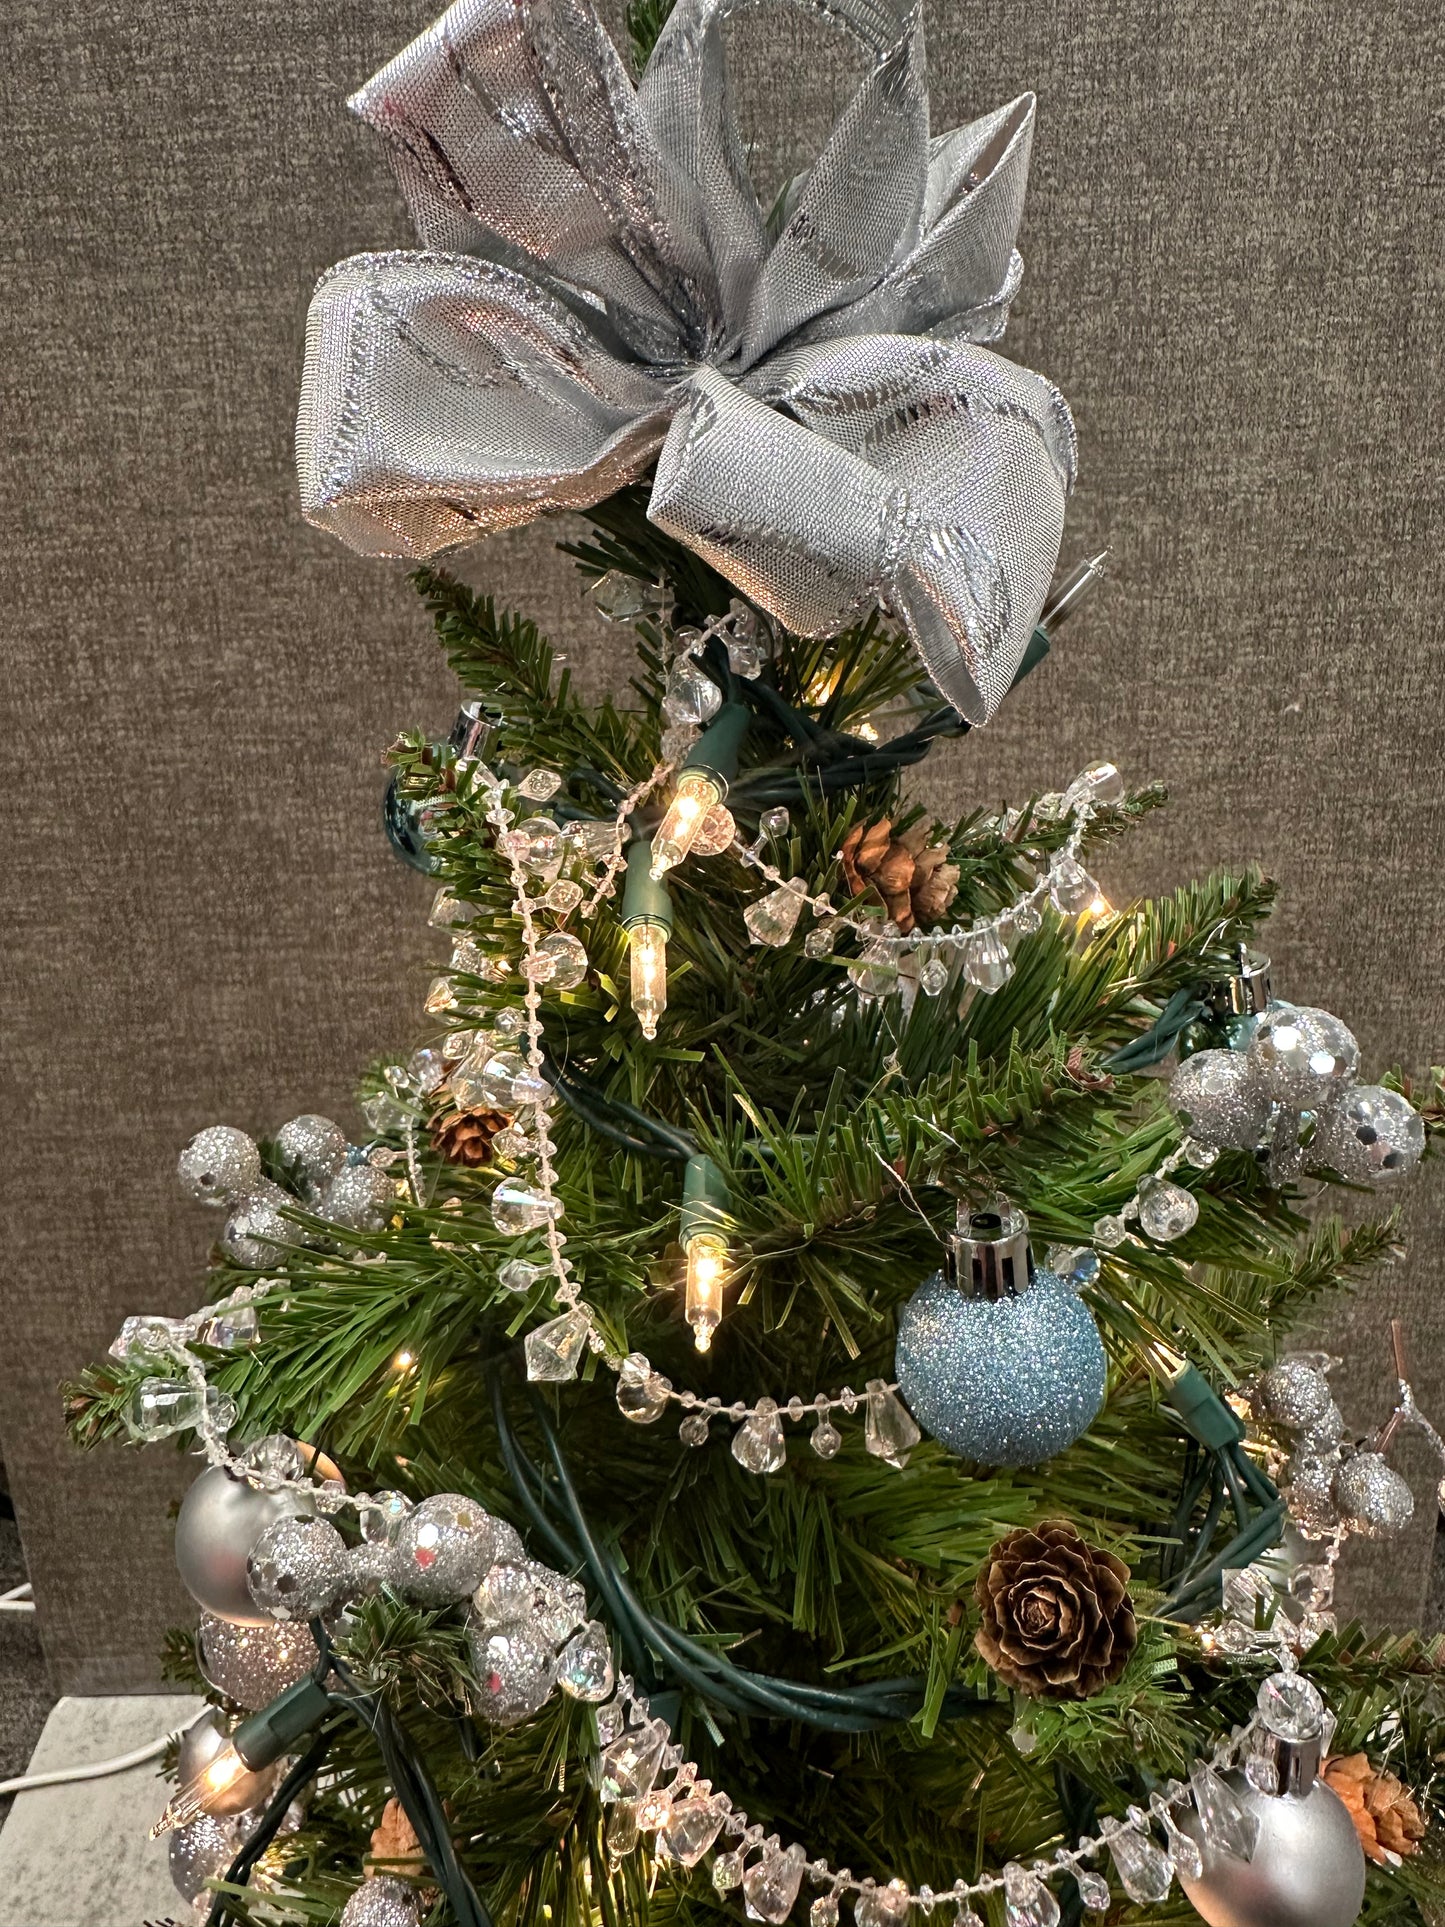 24” Mini Lighted Christmas Tree with silver accents, pinecones, and blue/silver ornaments-made by hand